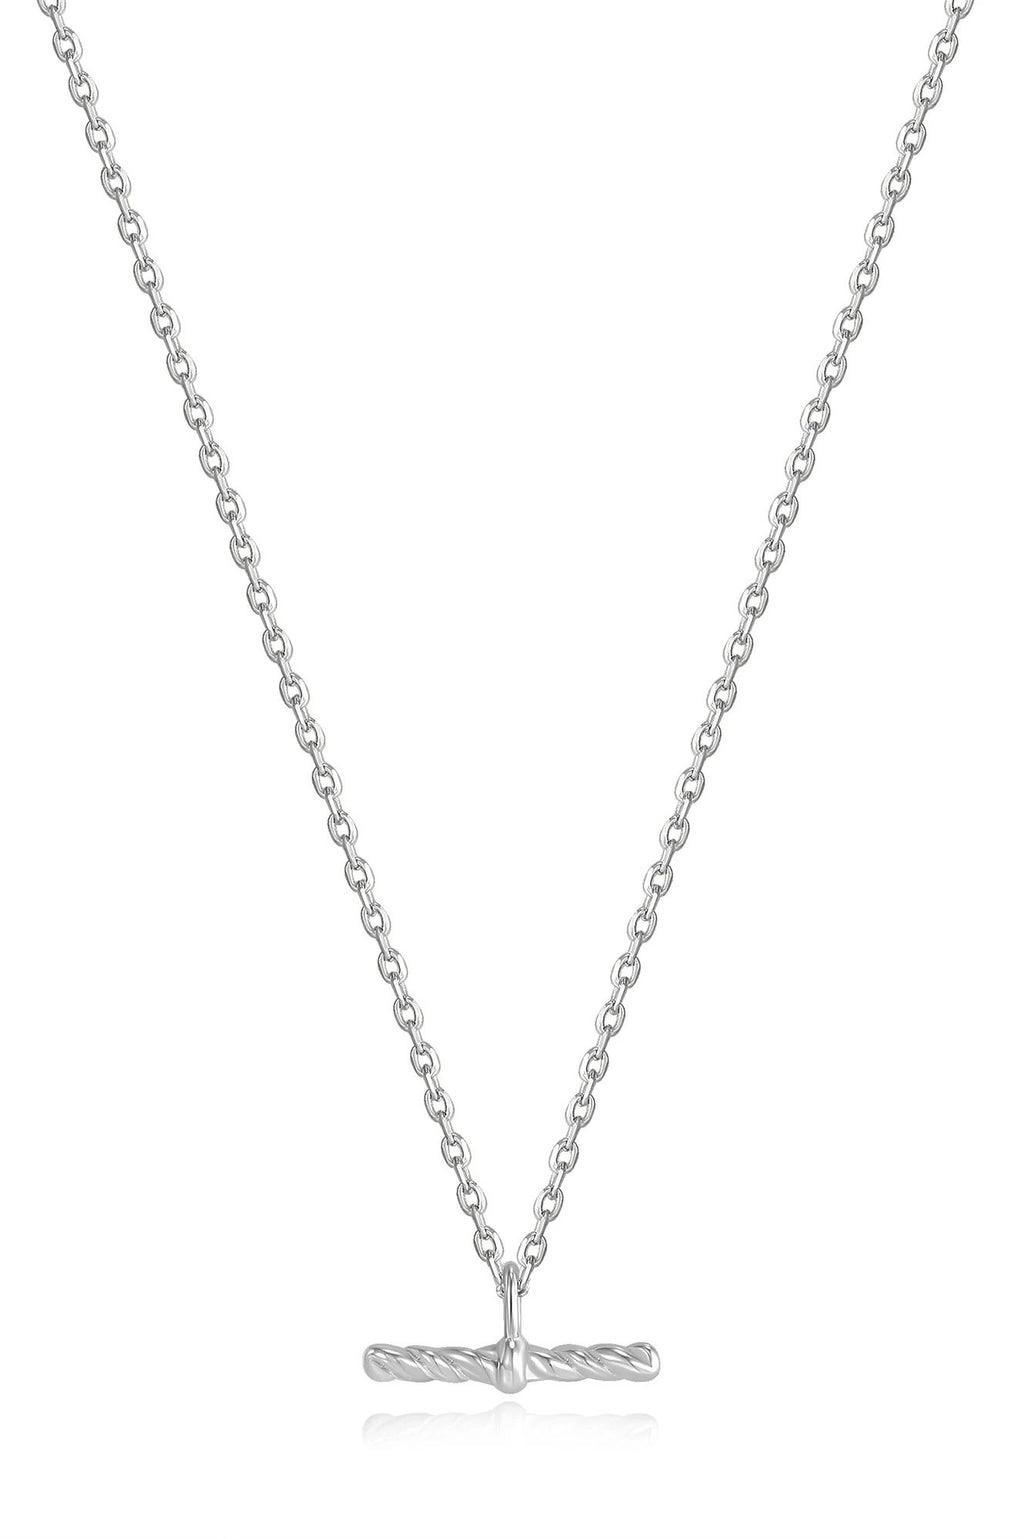 Ania Haie Silver Rope T-Bar Necklace - The Mercantile London